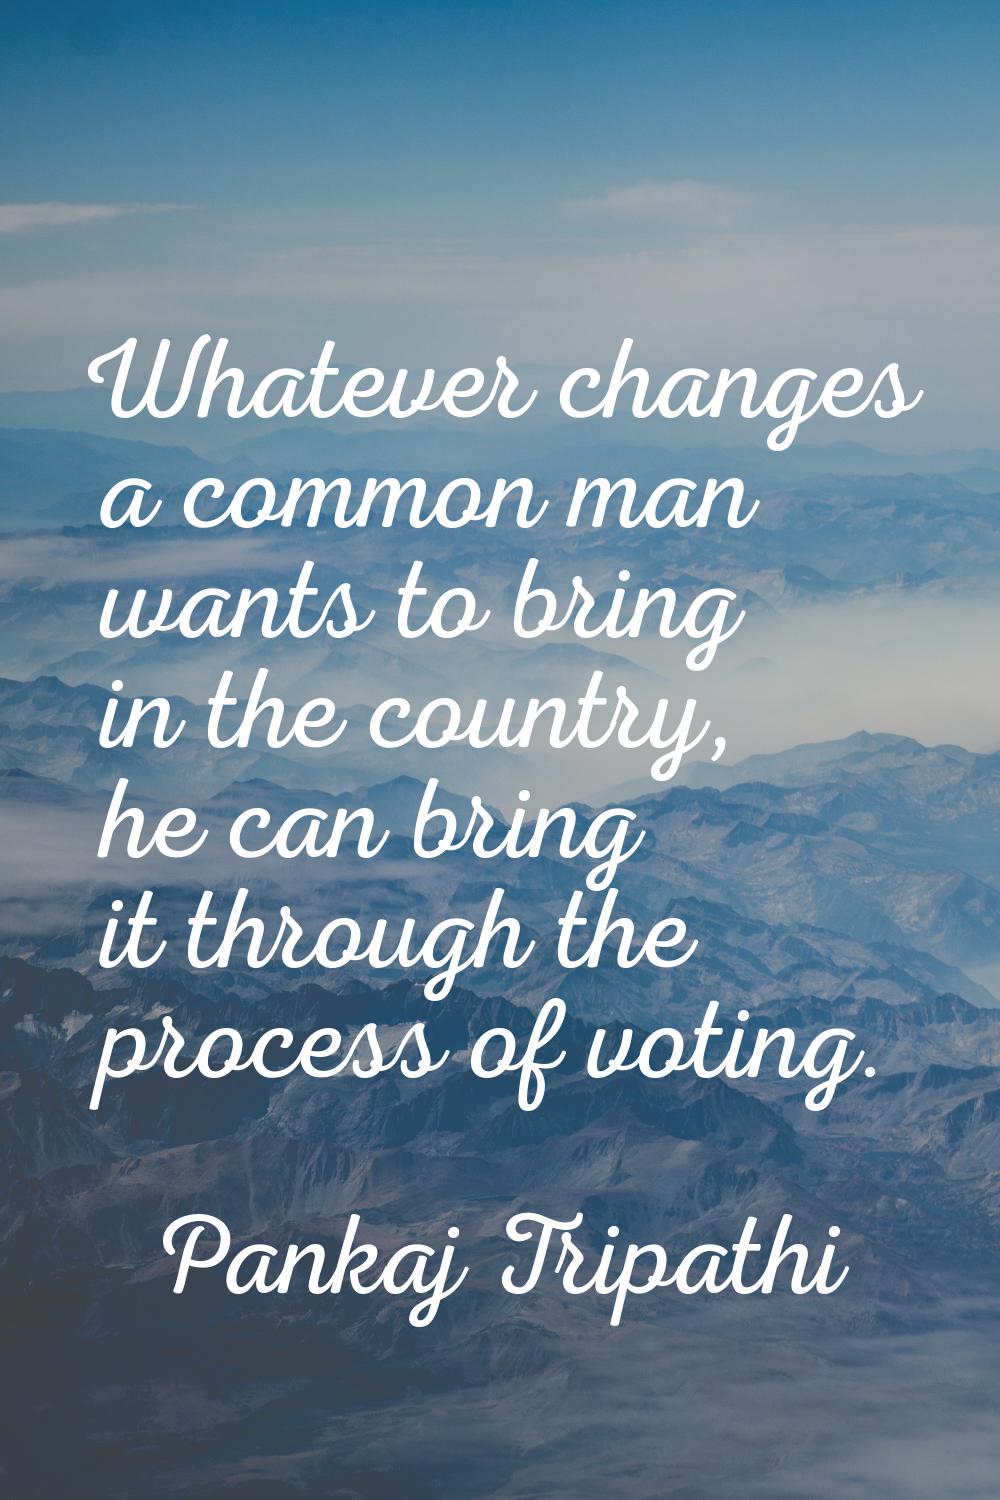 Whatever changes a common man wants to bring in the country, he can bring it through the process of